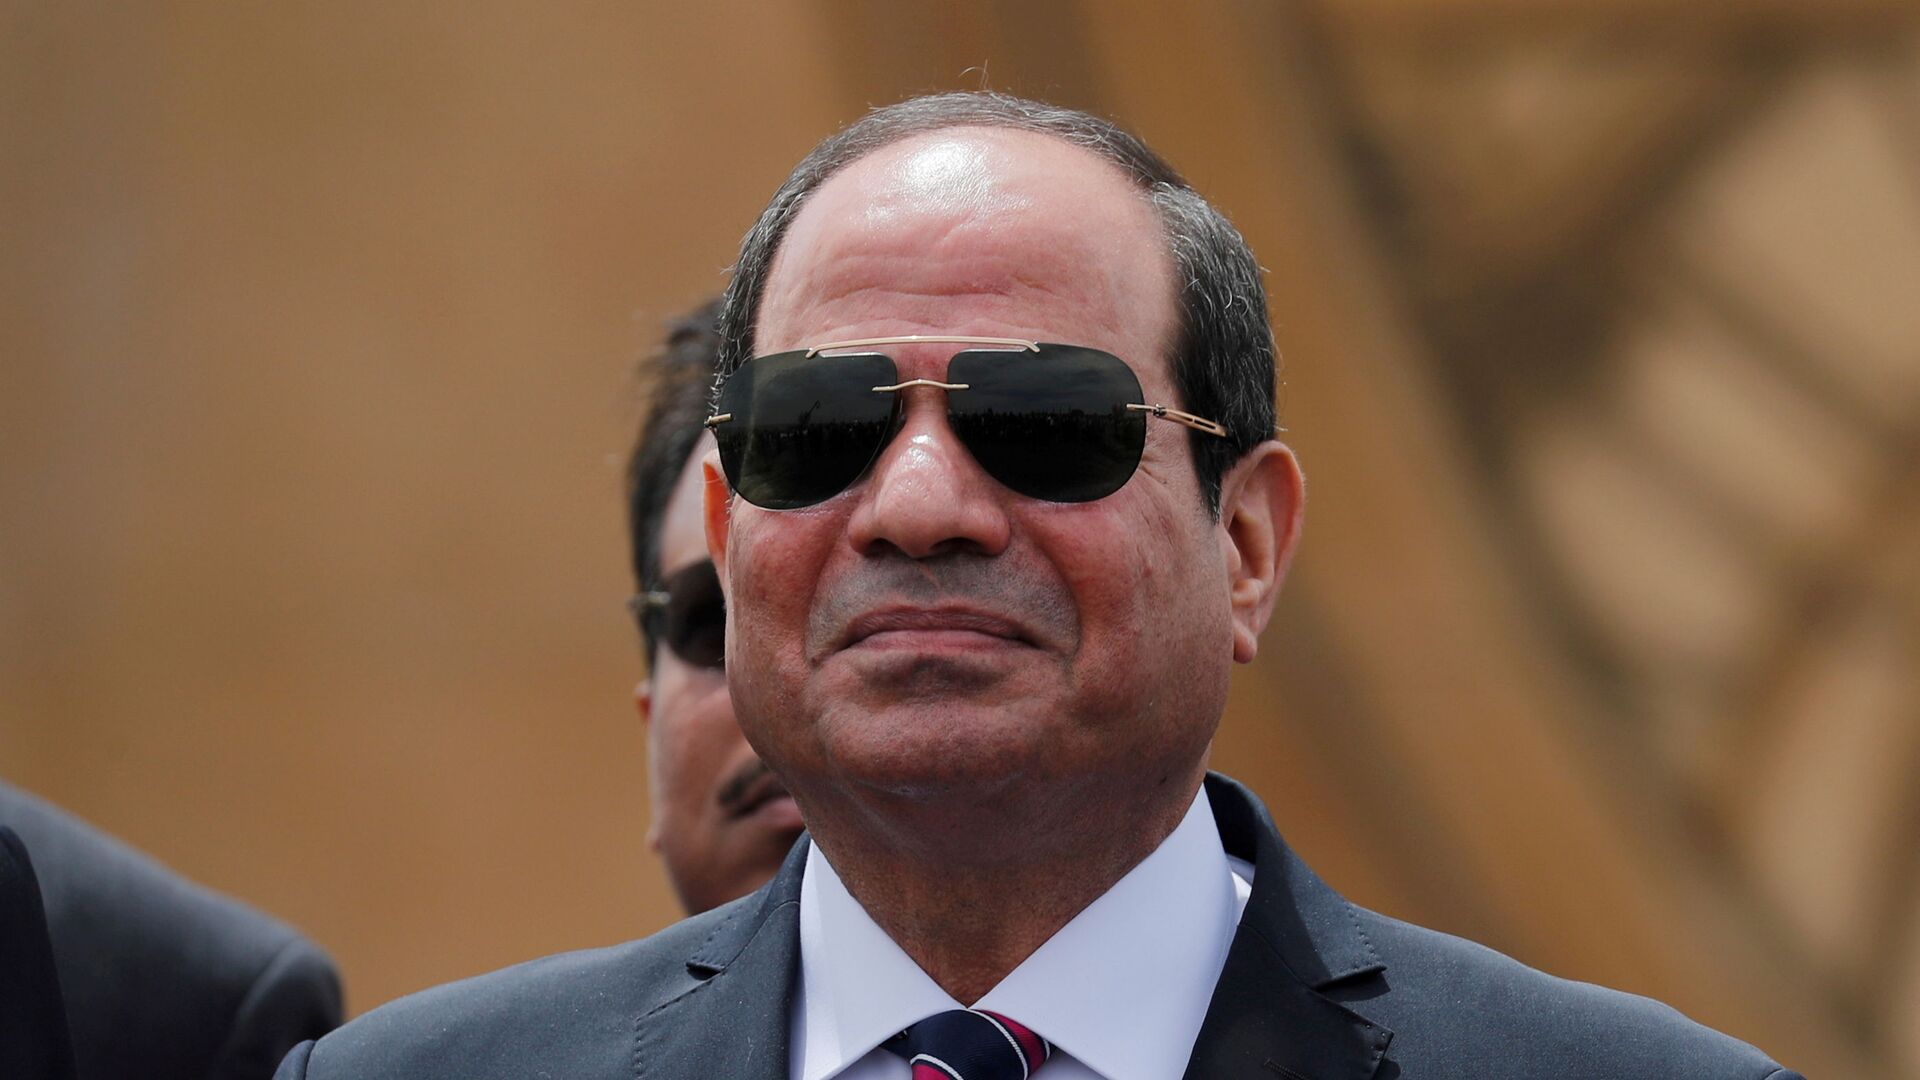 Egyptian President Abdel Fattah al-Sisi attends the opening ceremony of floating bridges and tunnel projects executed under the Suez Canal in Ismailia, Egypt May 5, 2019. - Sputnik International, 1920, 12.09.2021